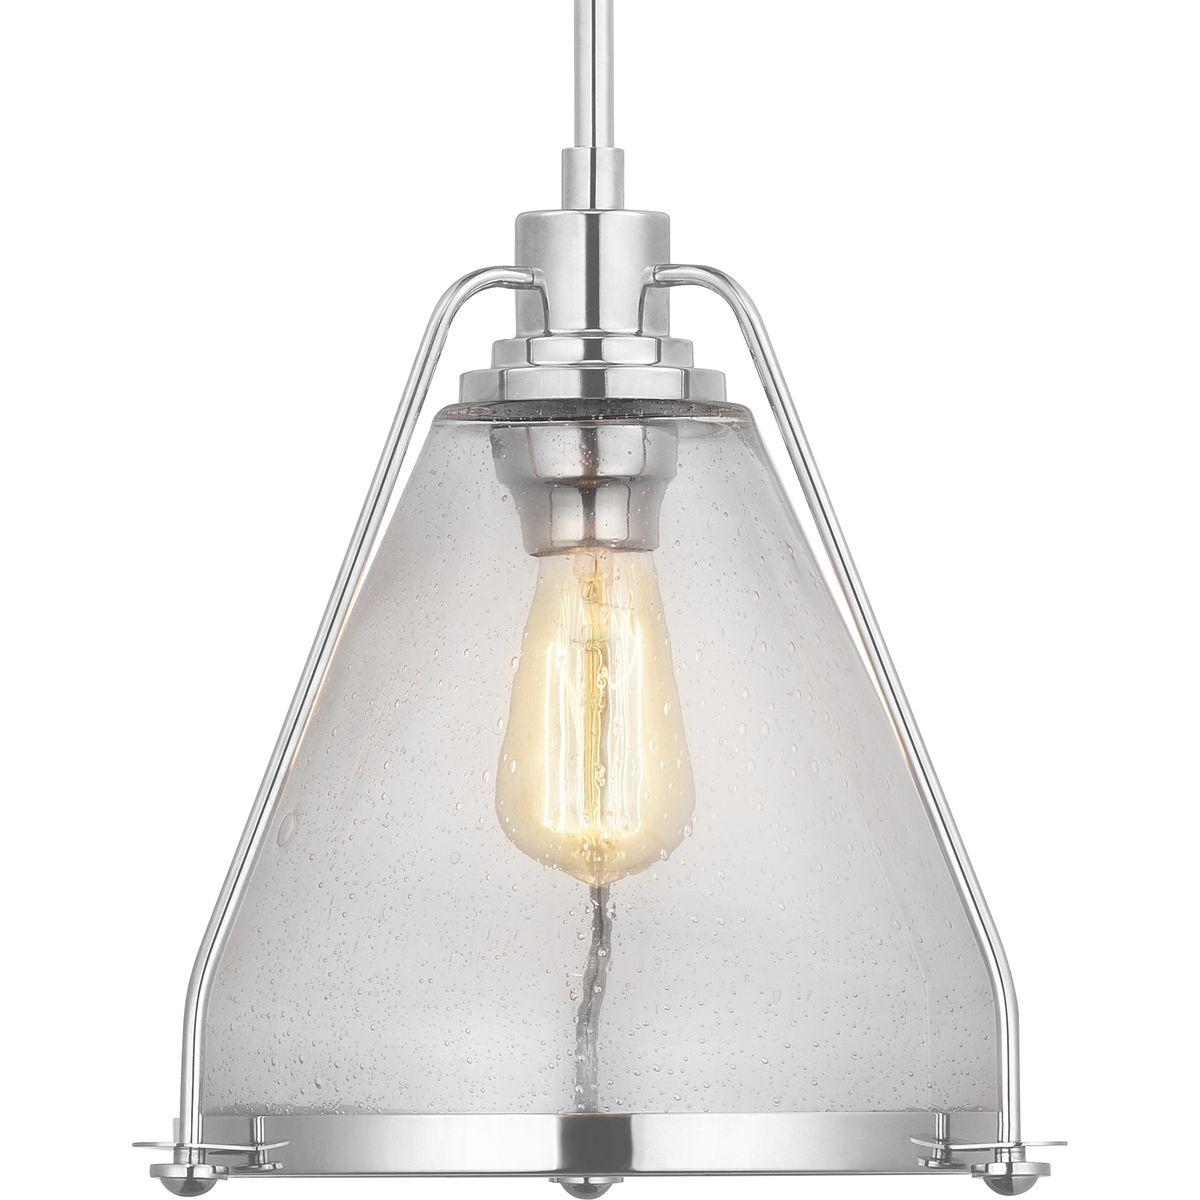 Hubbell P500135-104 Range features a classic triangular clear seeded glass shade. The simple geometric glass is outlined with a Polished Nickel slender frame and finished with a bottom metal accent ring. Simple and stylish, this versatile style is suitable for a variety of d